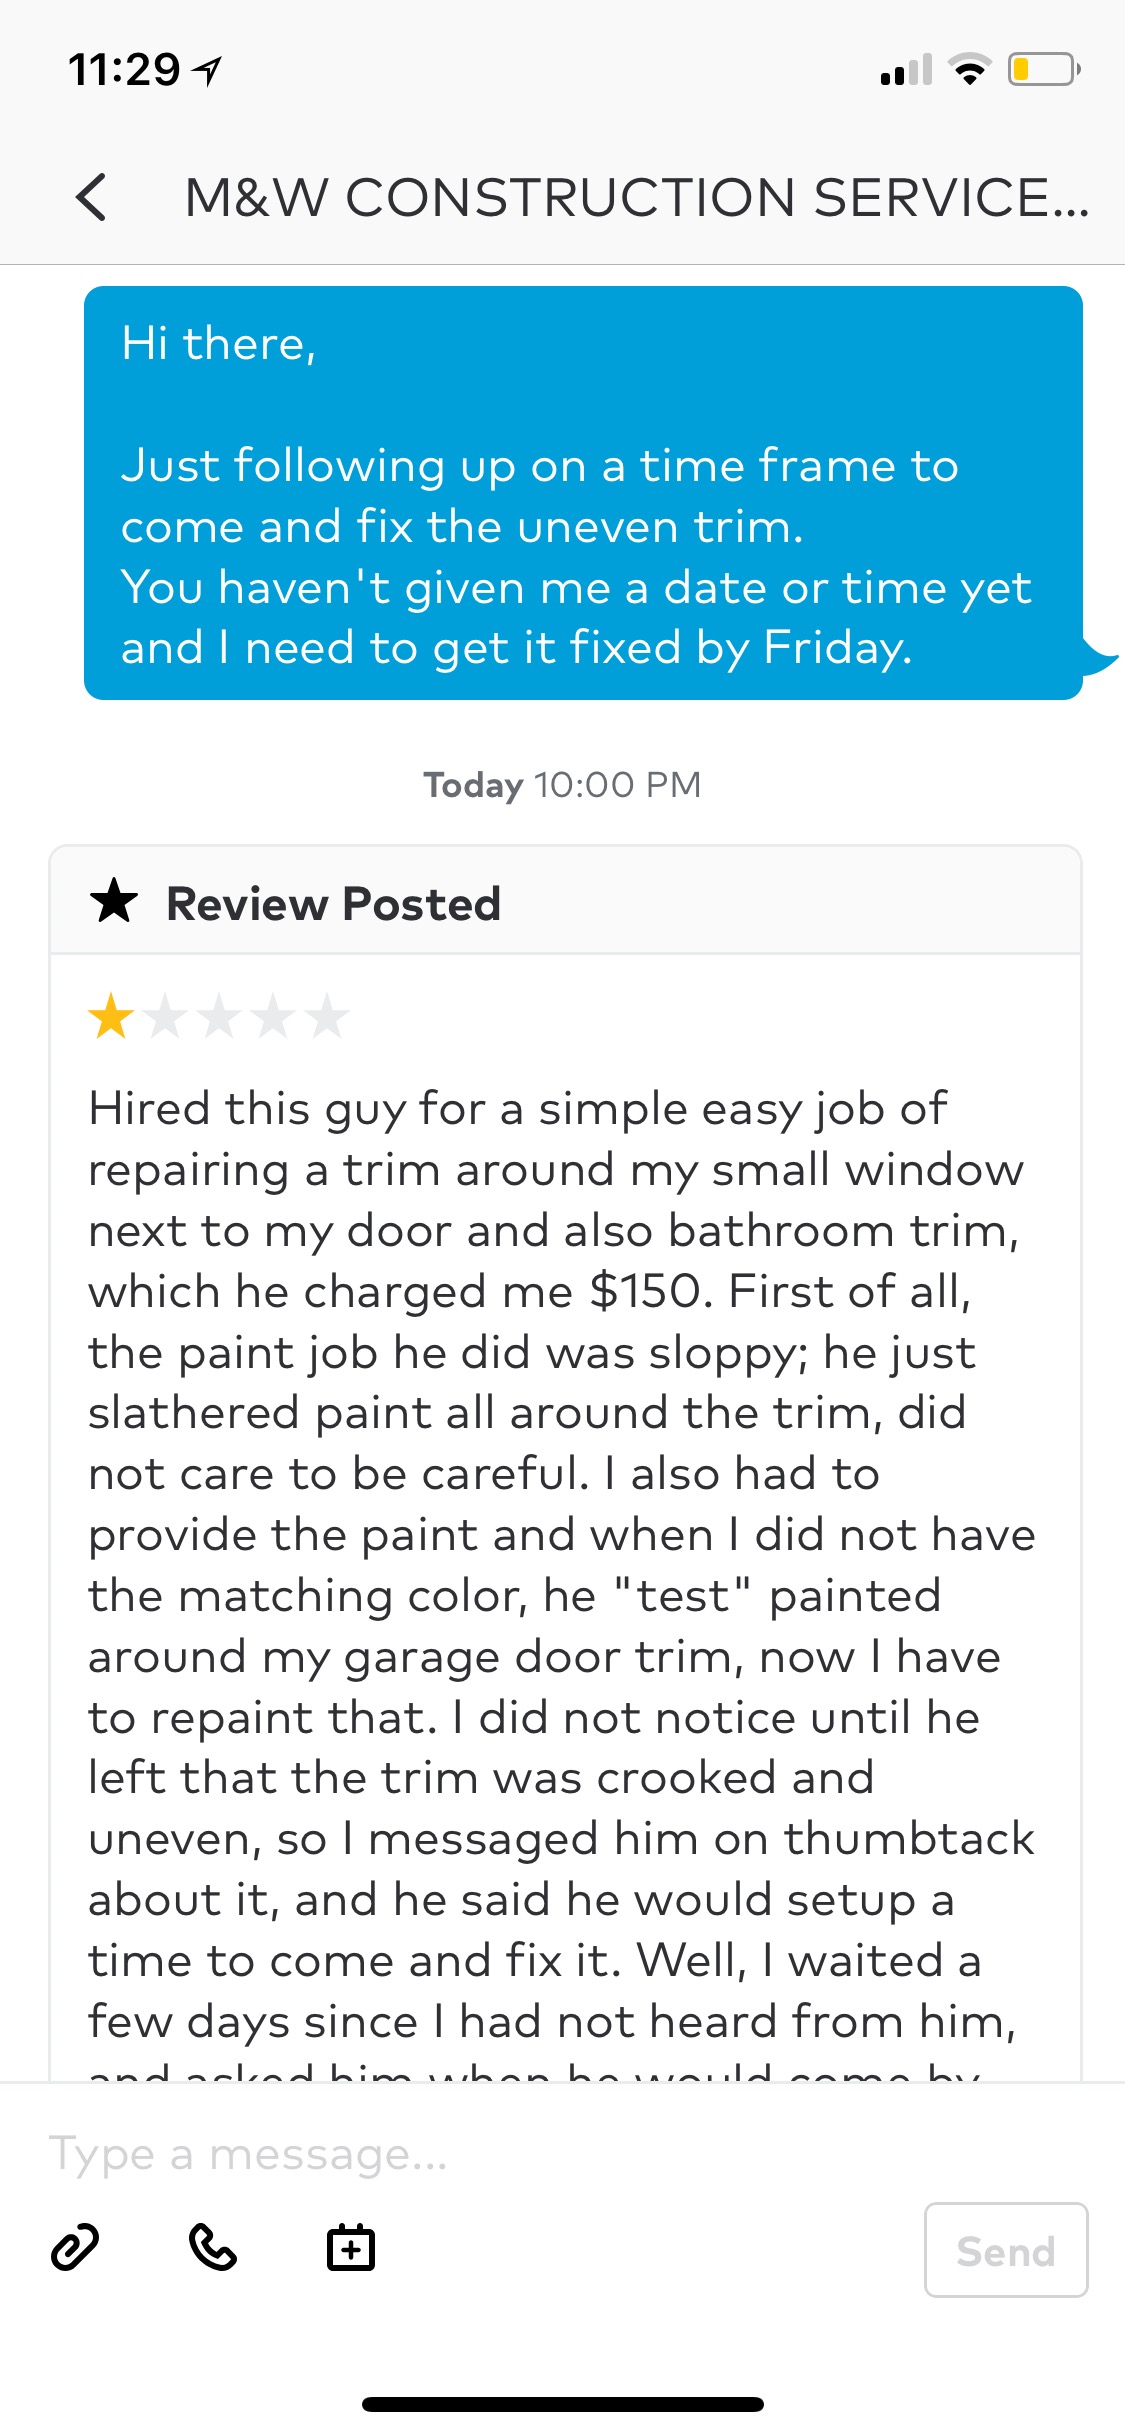 My review after waiting for him to respond 